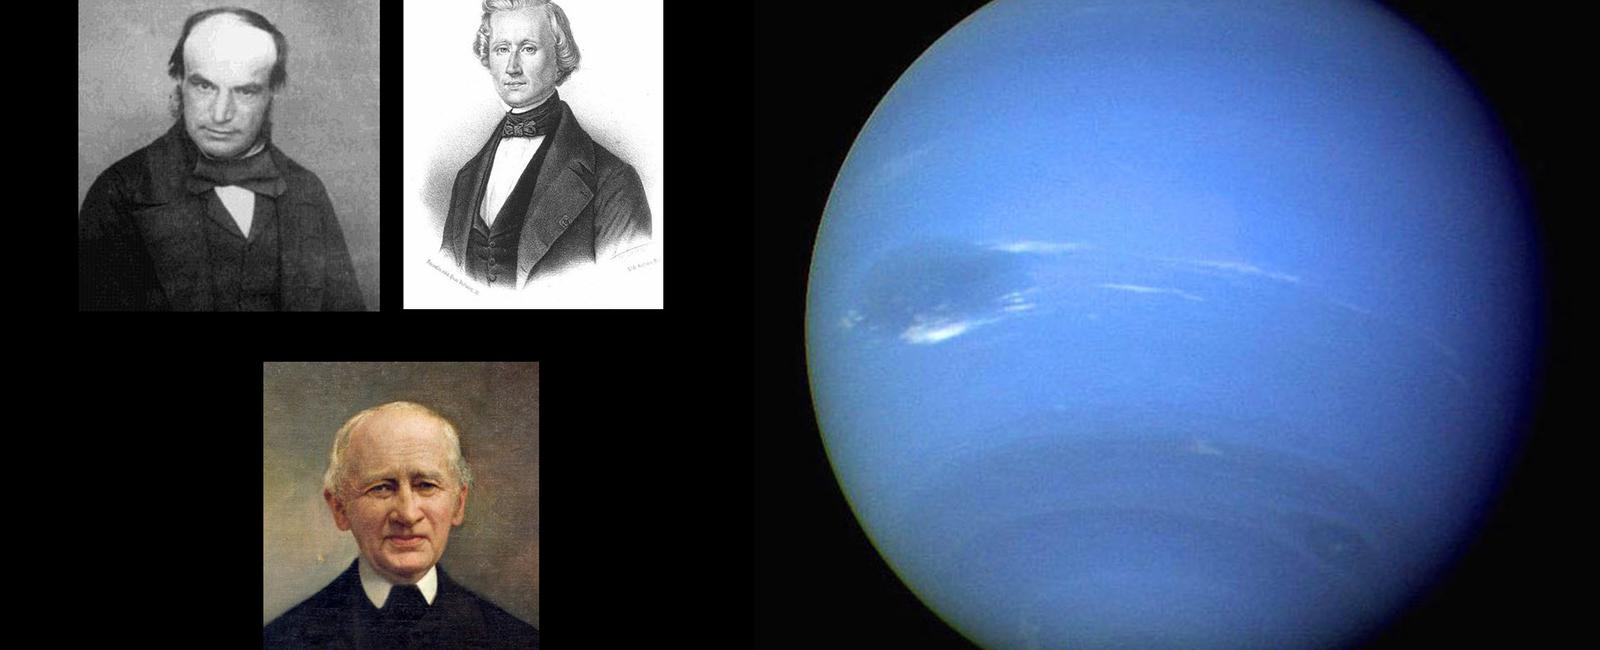 Neptune was the first planet discovered through mathematics